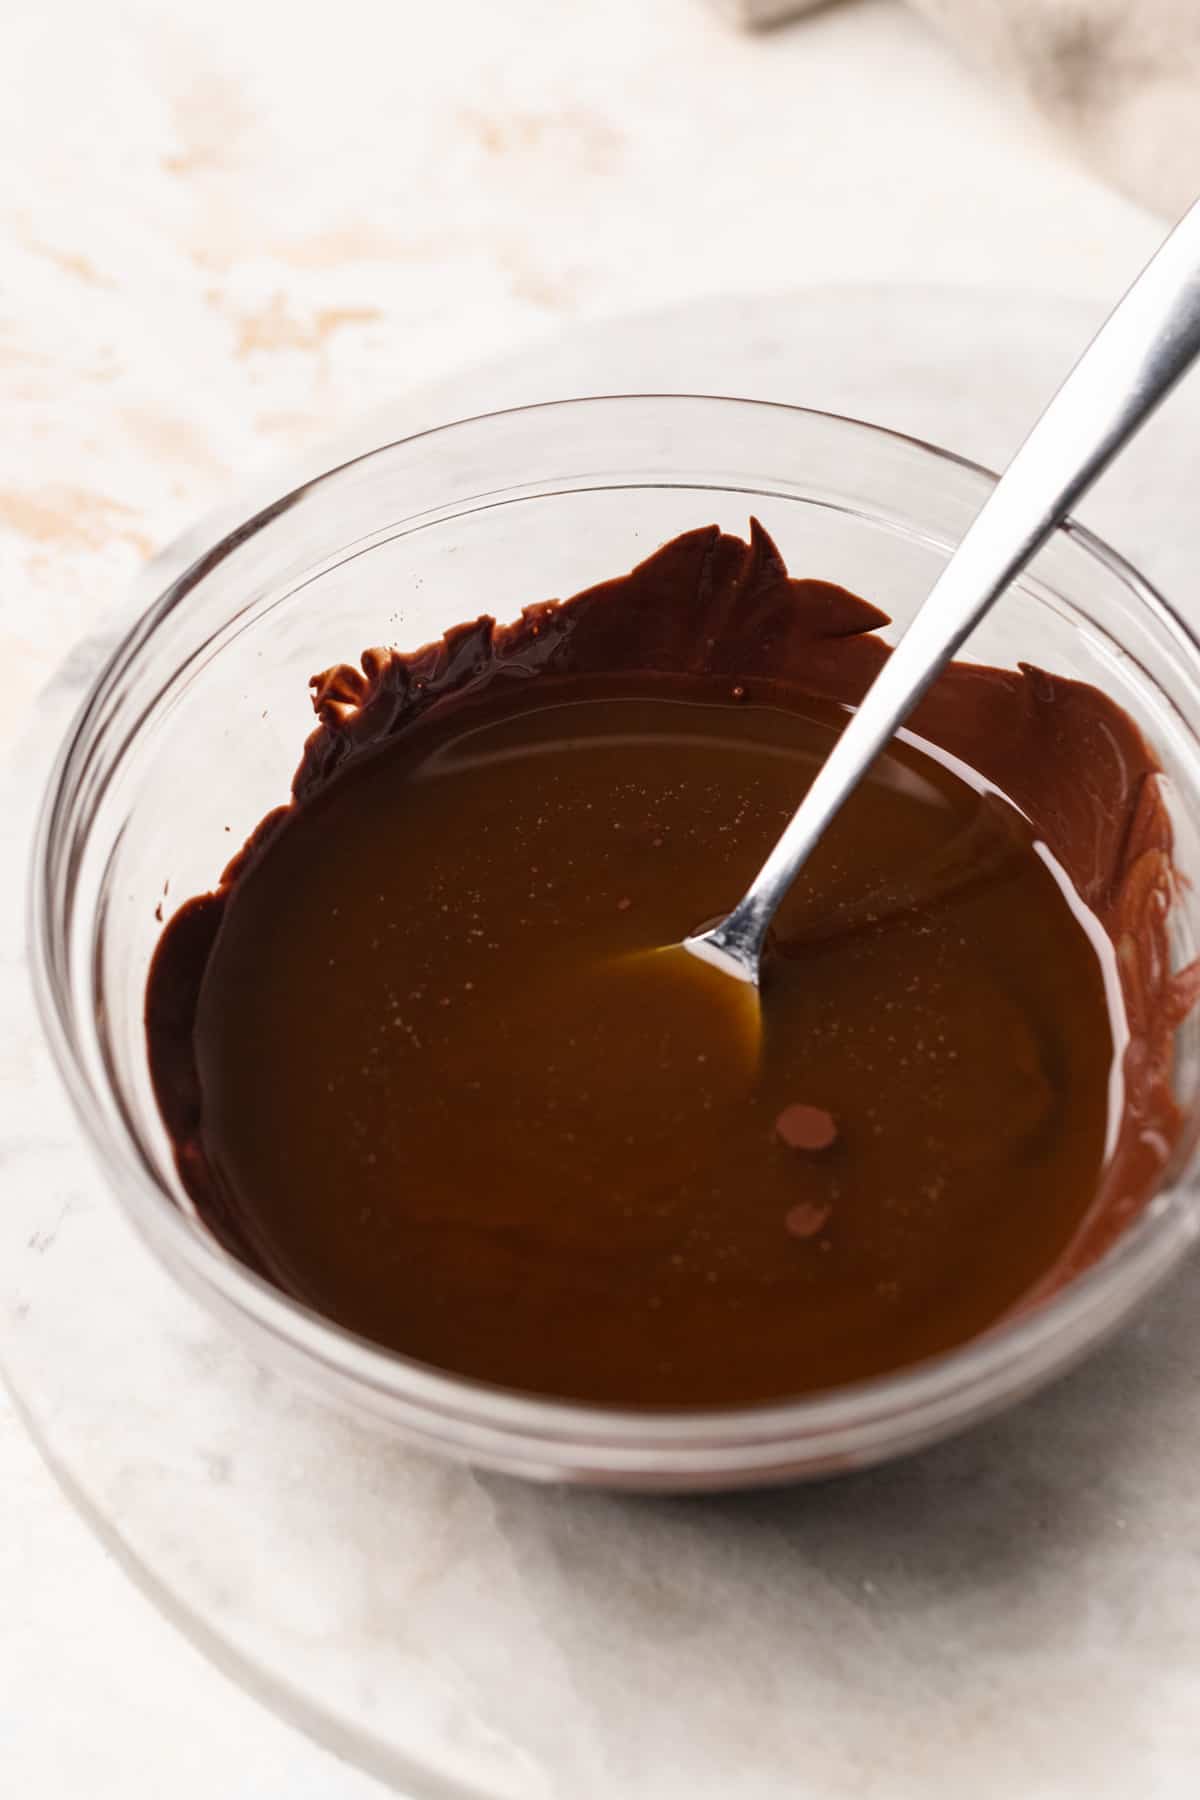 Melted chocolate and olive oil in a bowl.